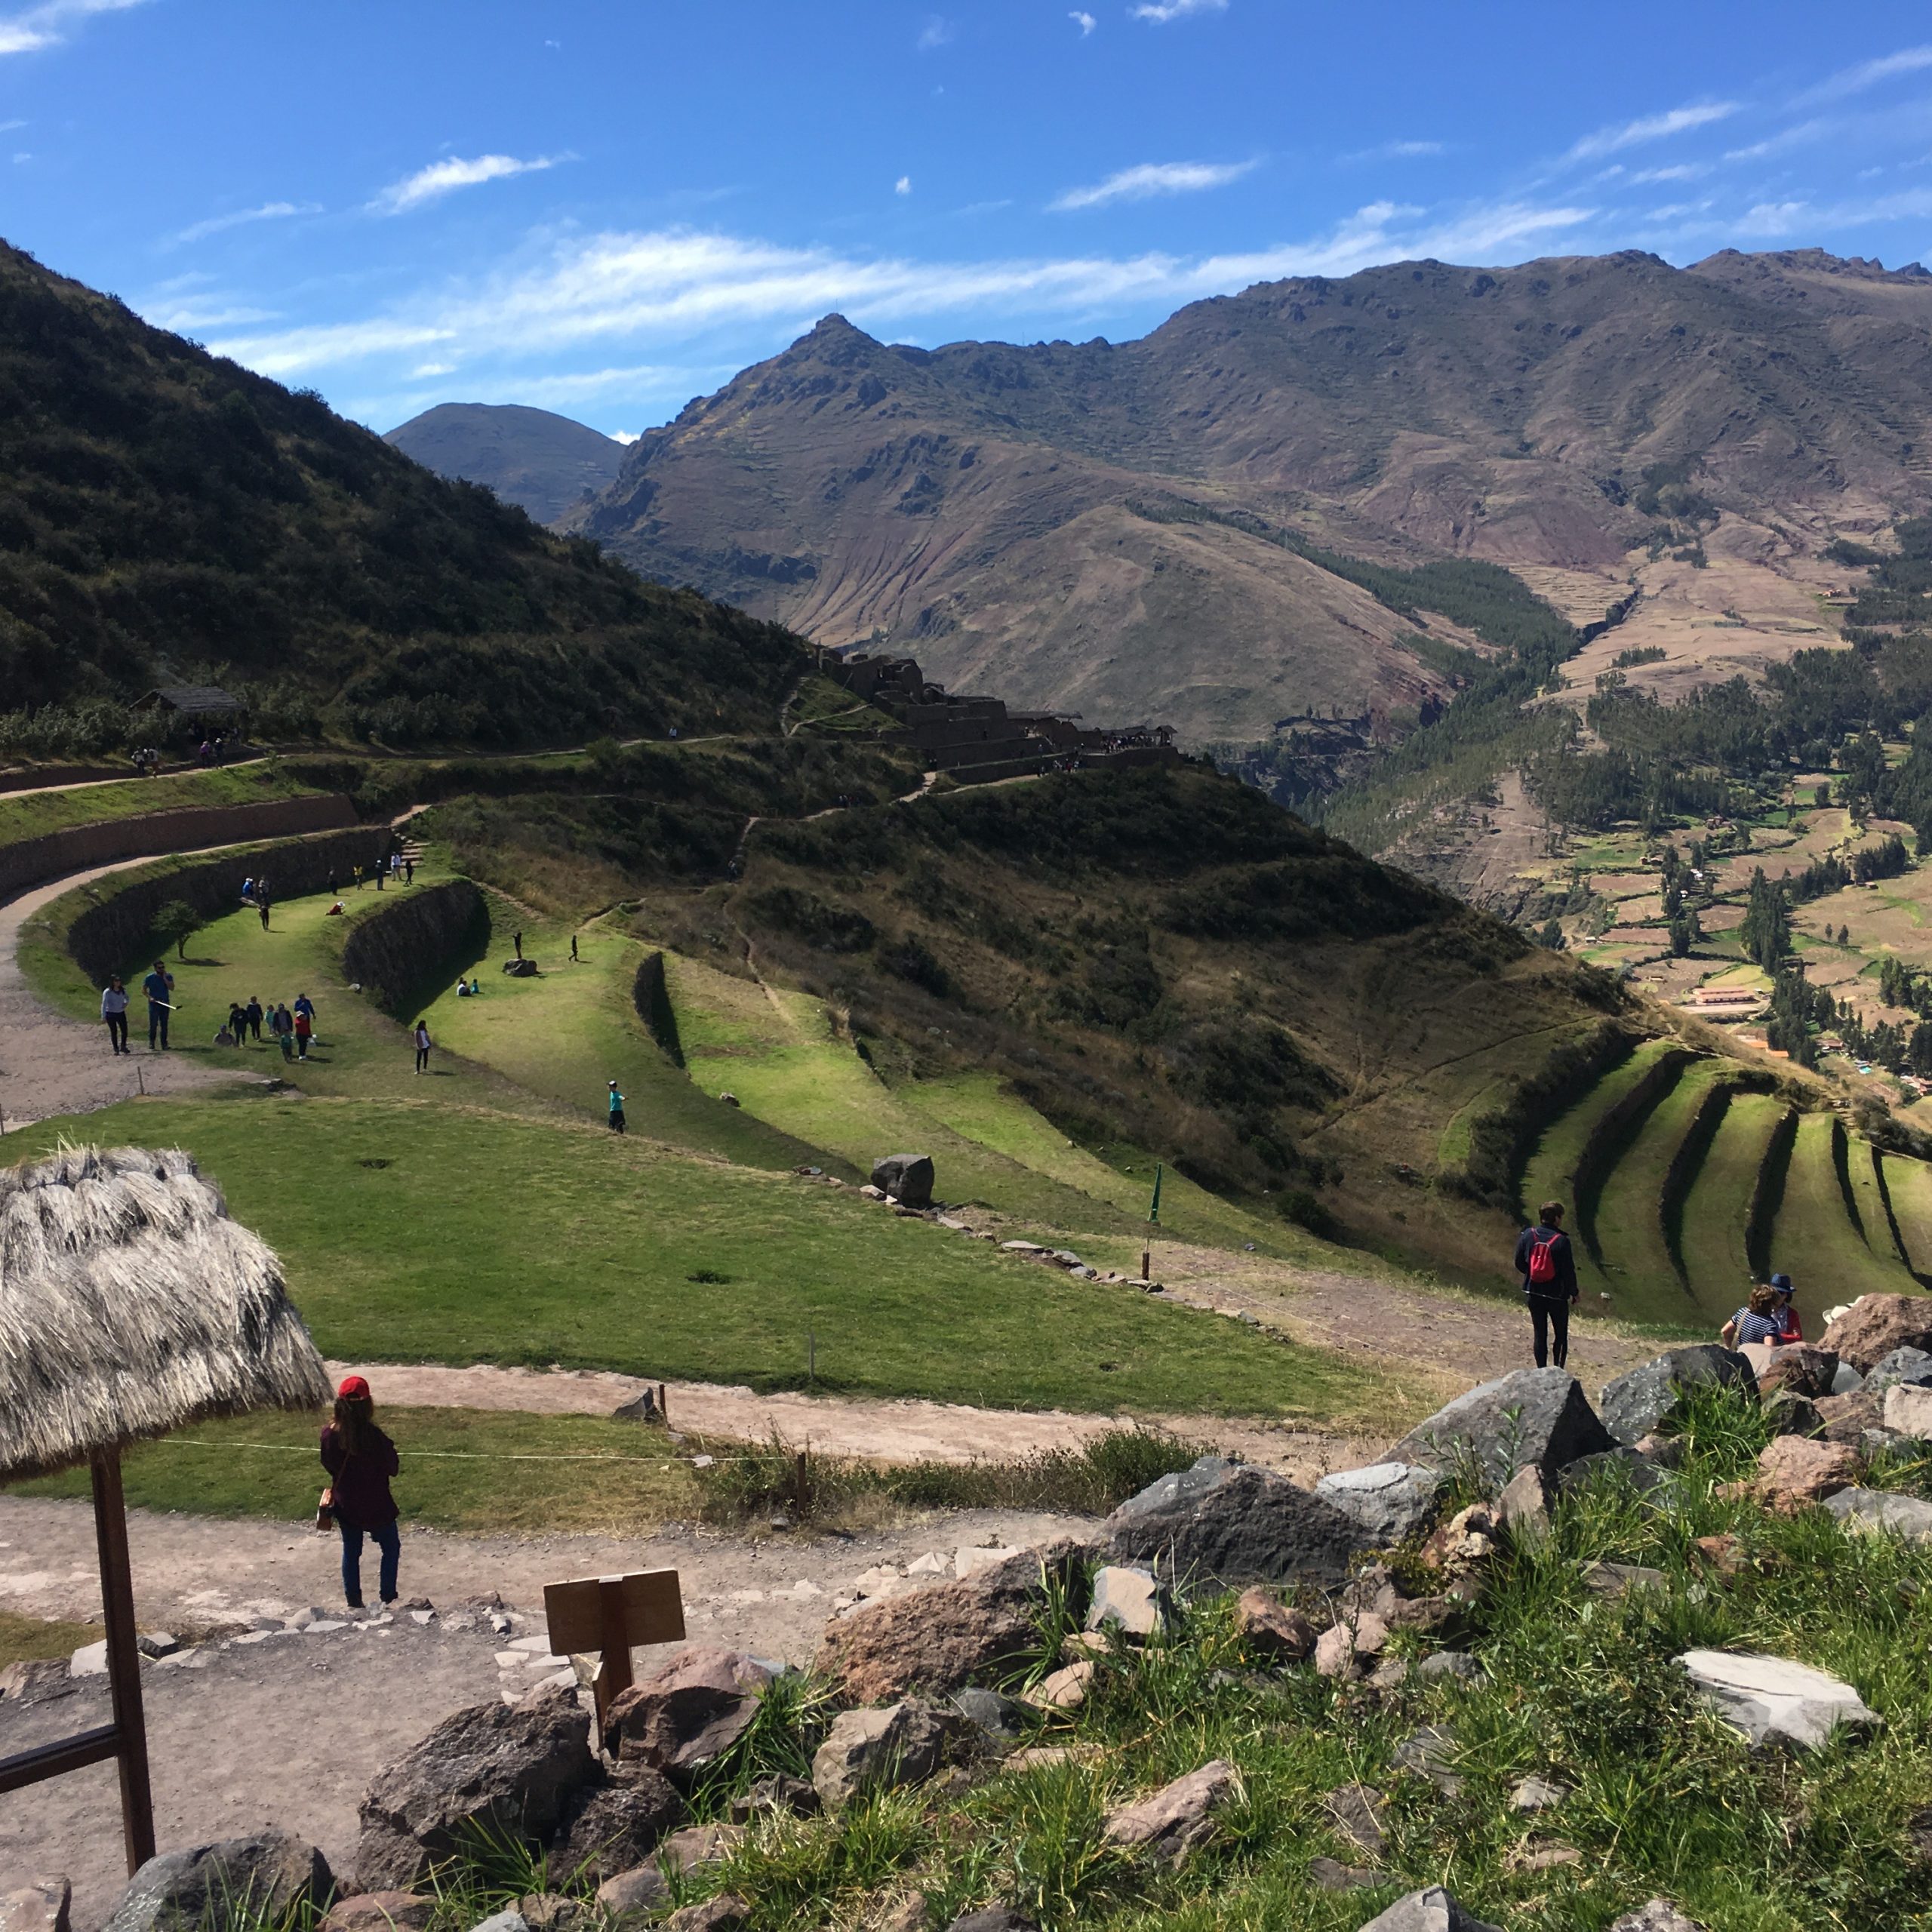 Day 9: Excursion to The Sacred Valley of the Incas